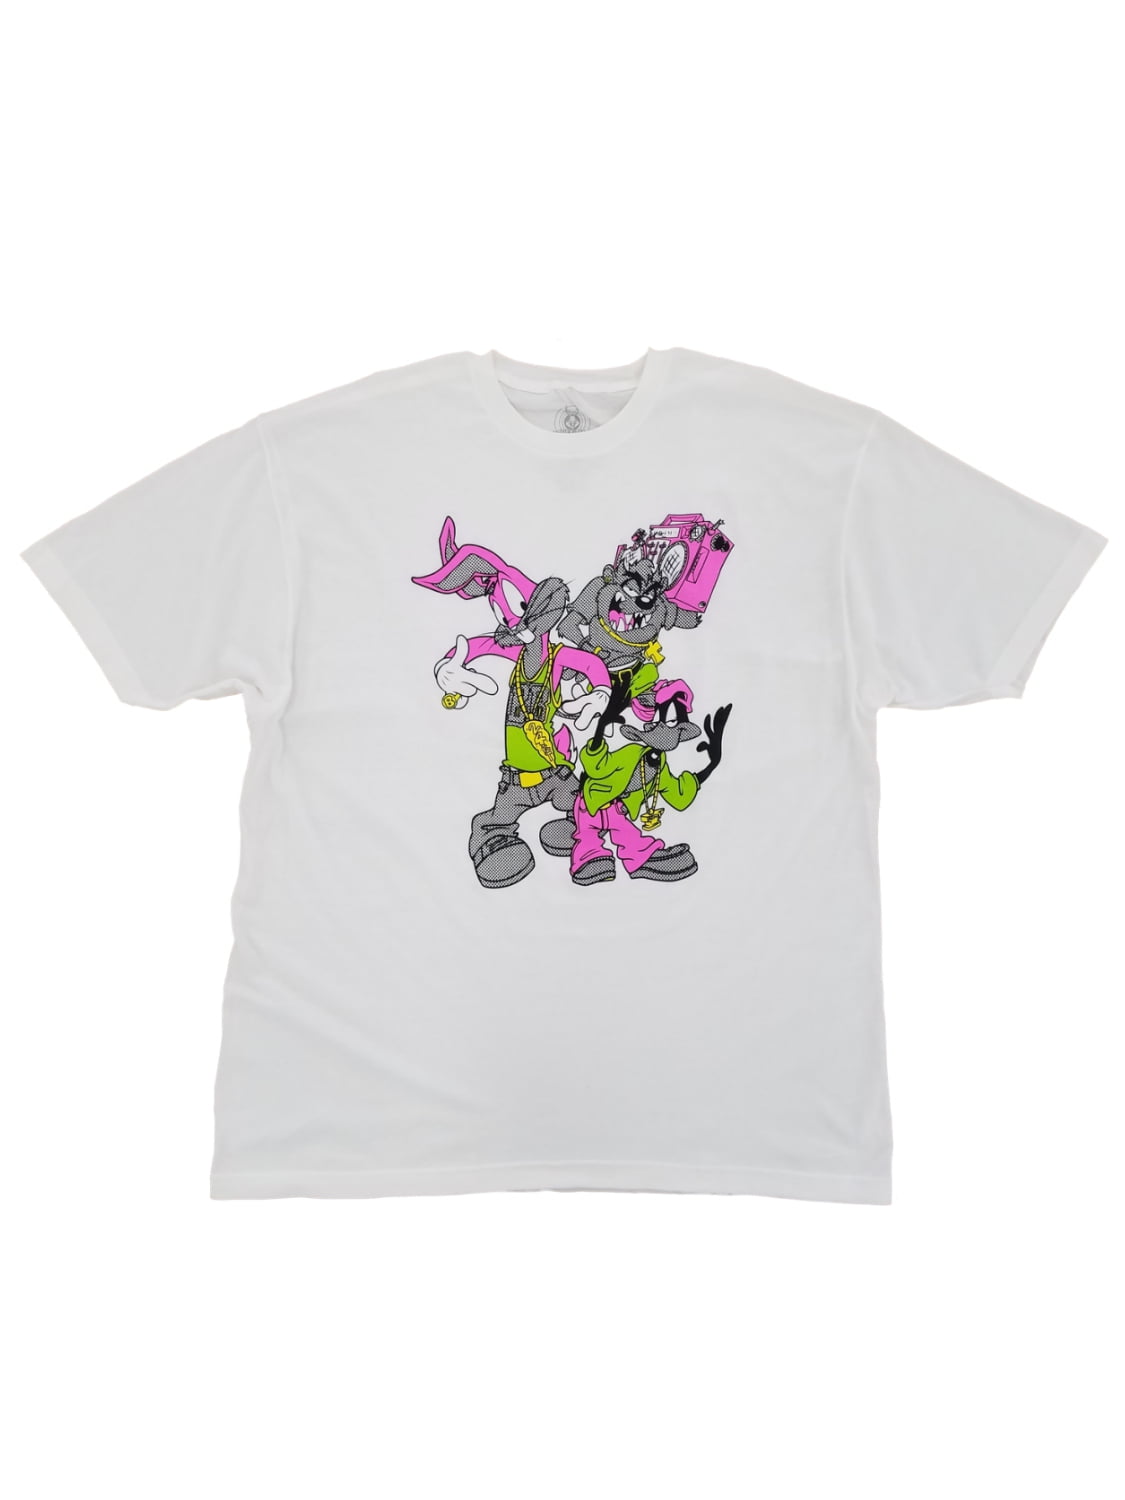 T-Shirt Daffy Bunny Tunes Bugs Duck Looney White 90\'s Mens Graphic Remix Taz 2XL